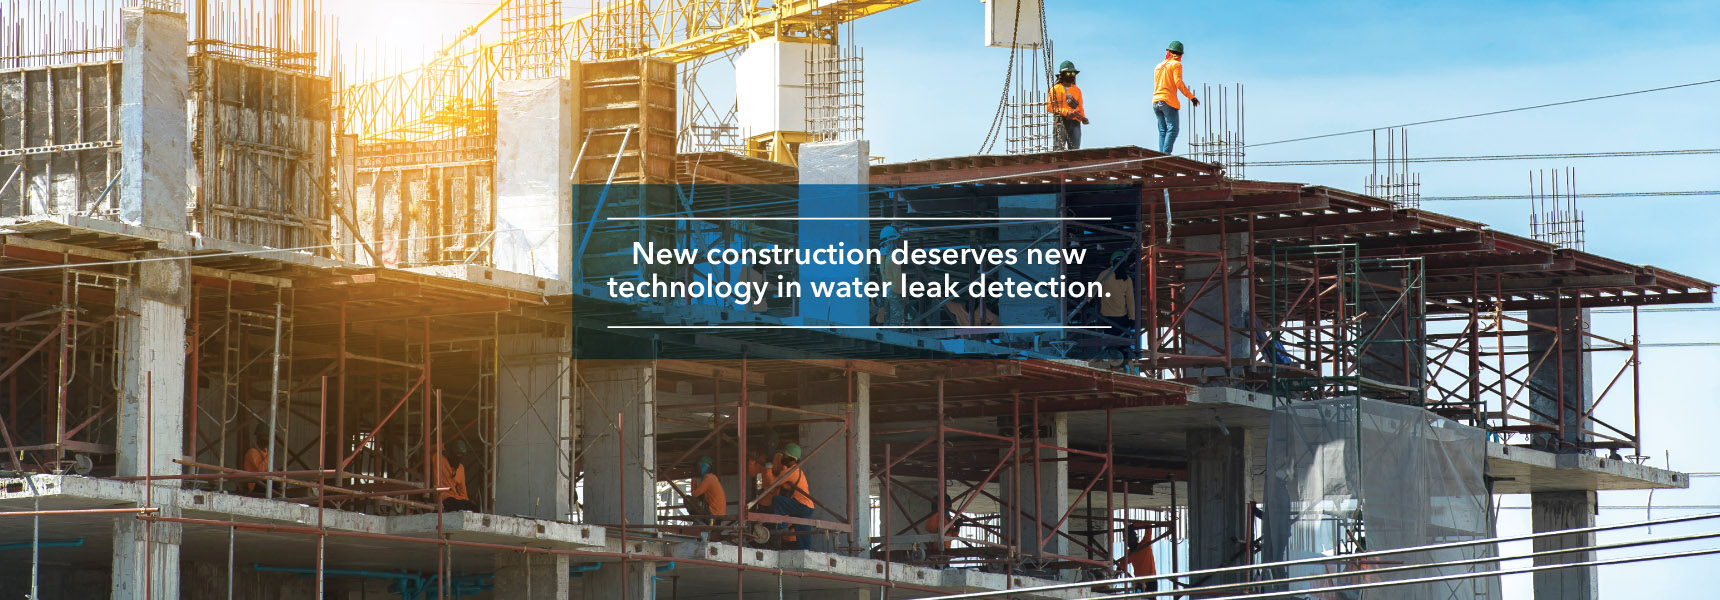 New construction deserves new technology in water leak detection.